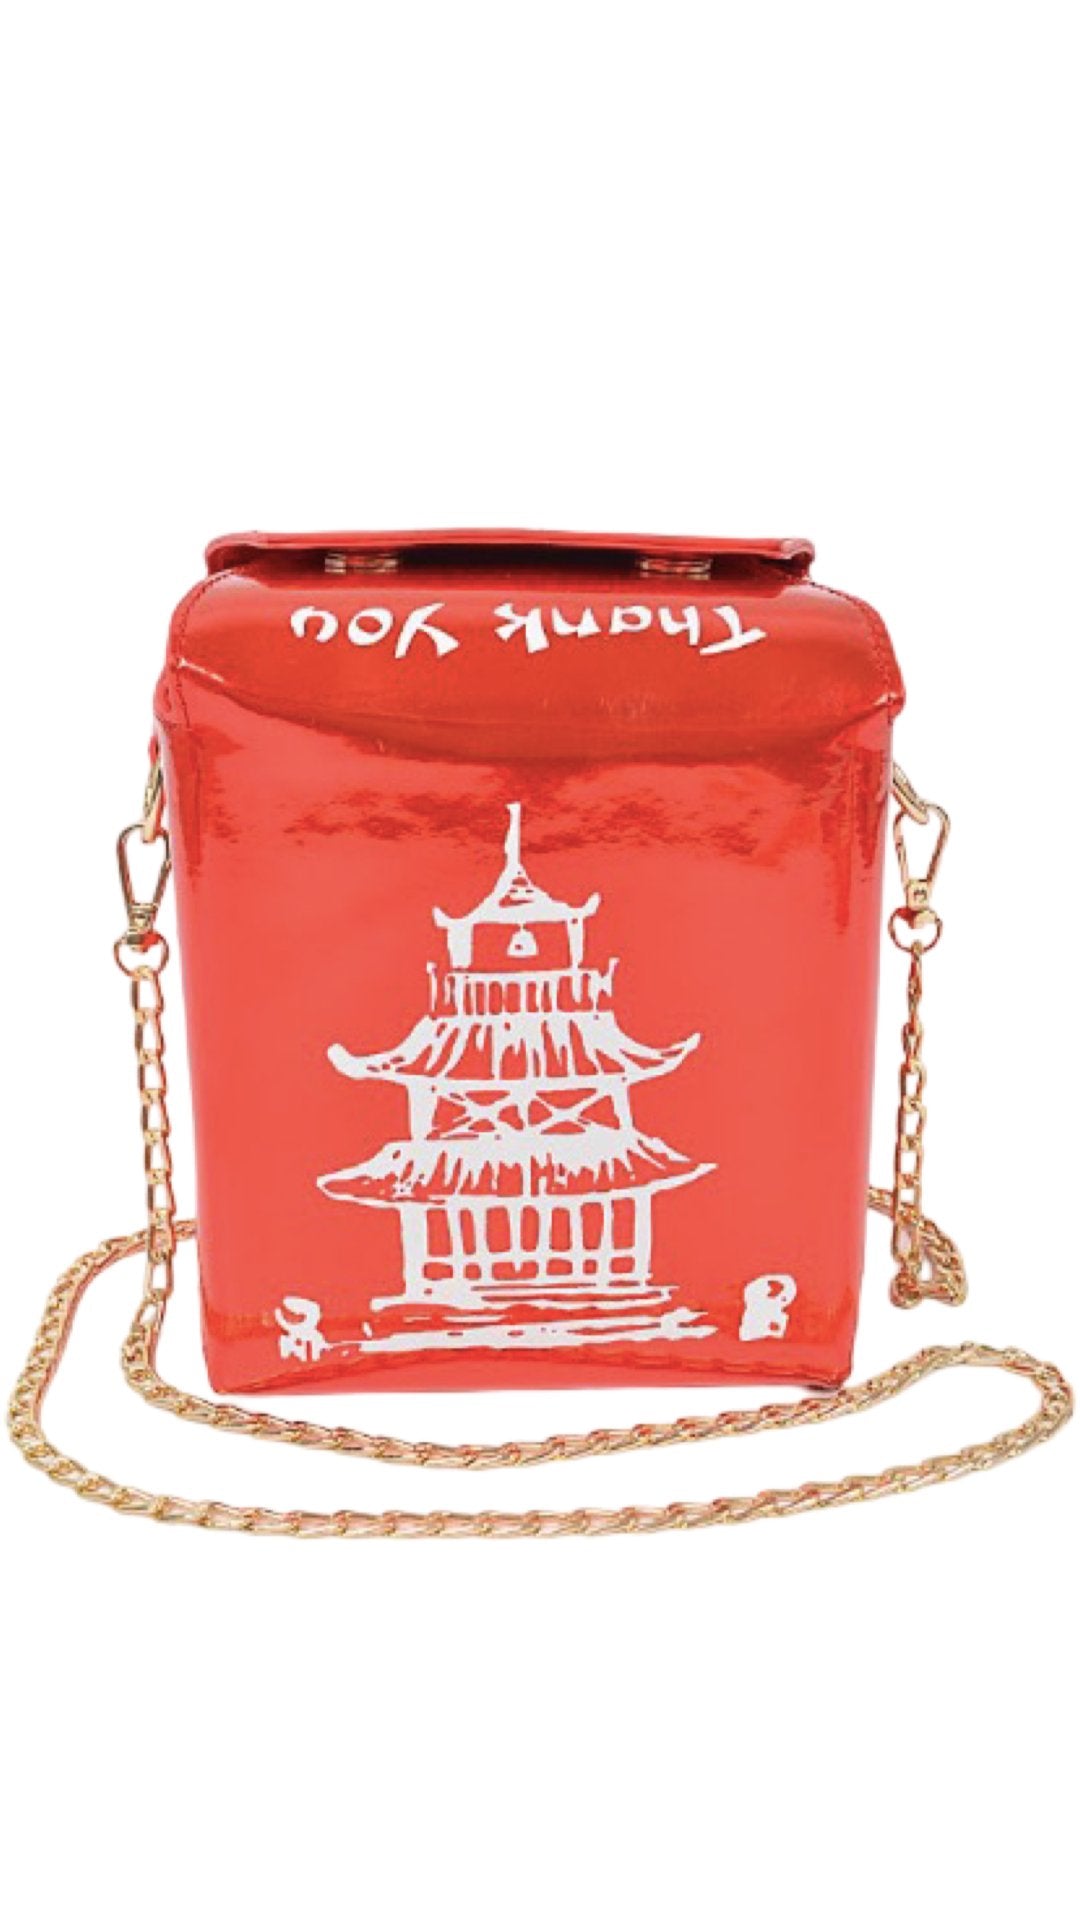 Chinese Takeout Box Bag Red - Model Express VancouverAccessories